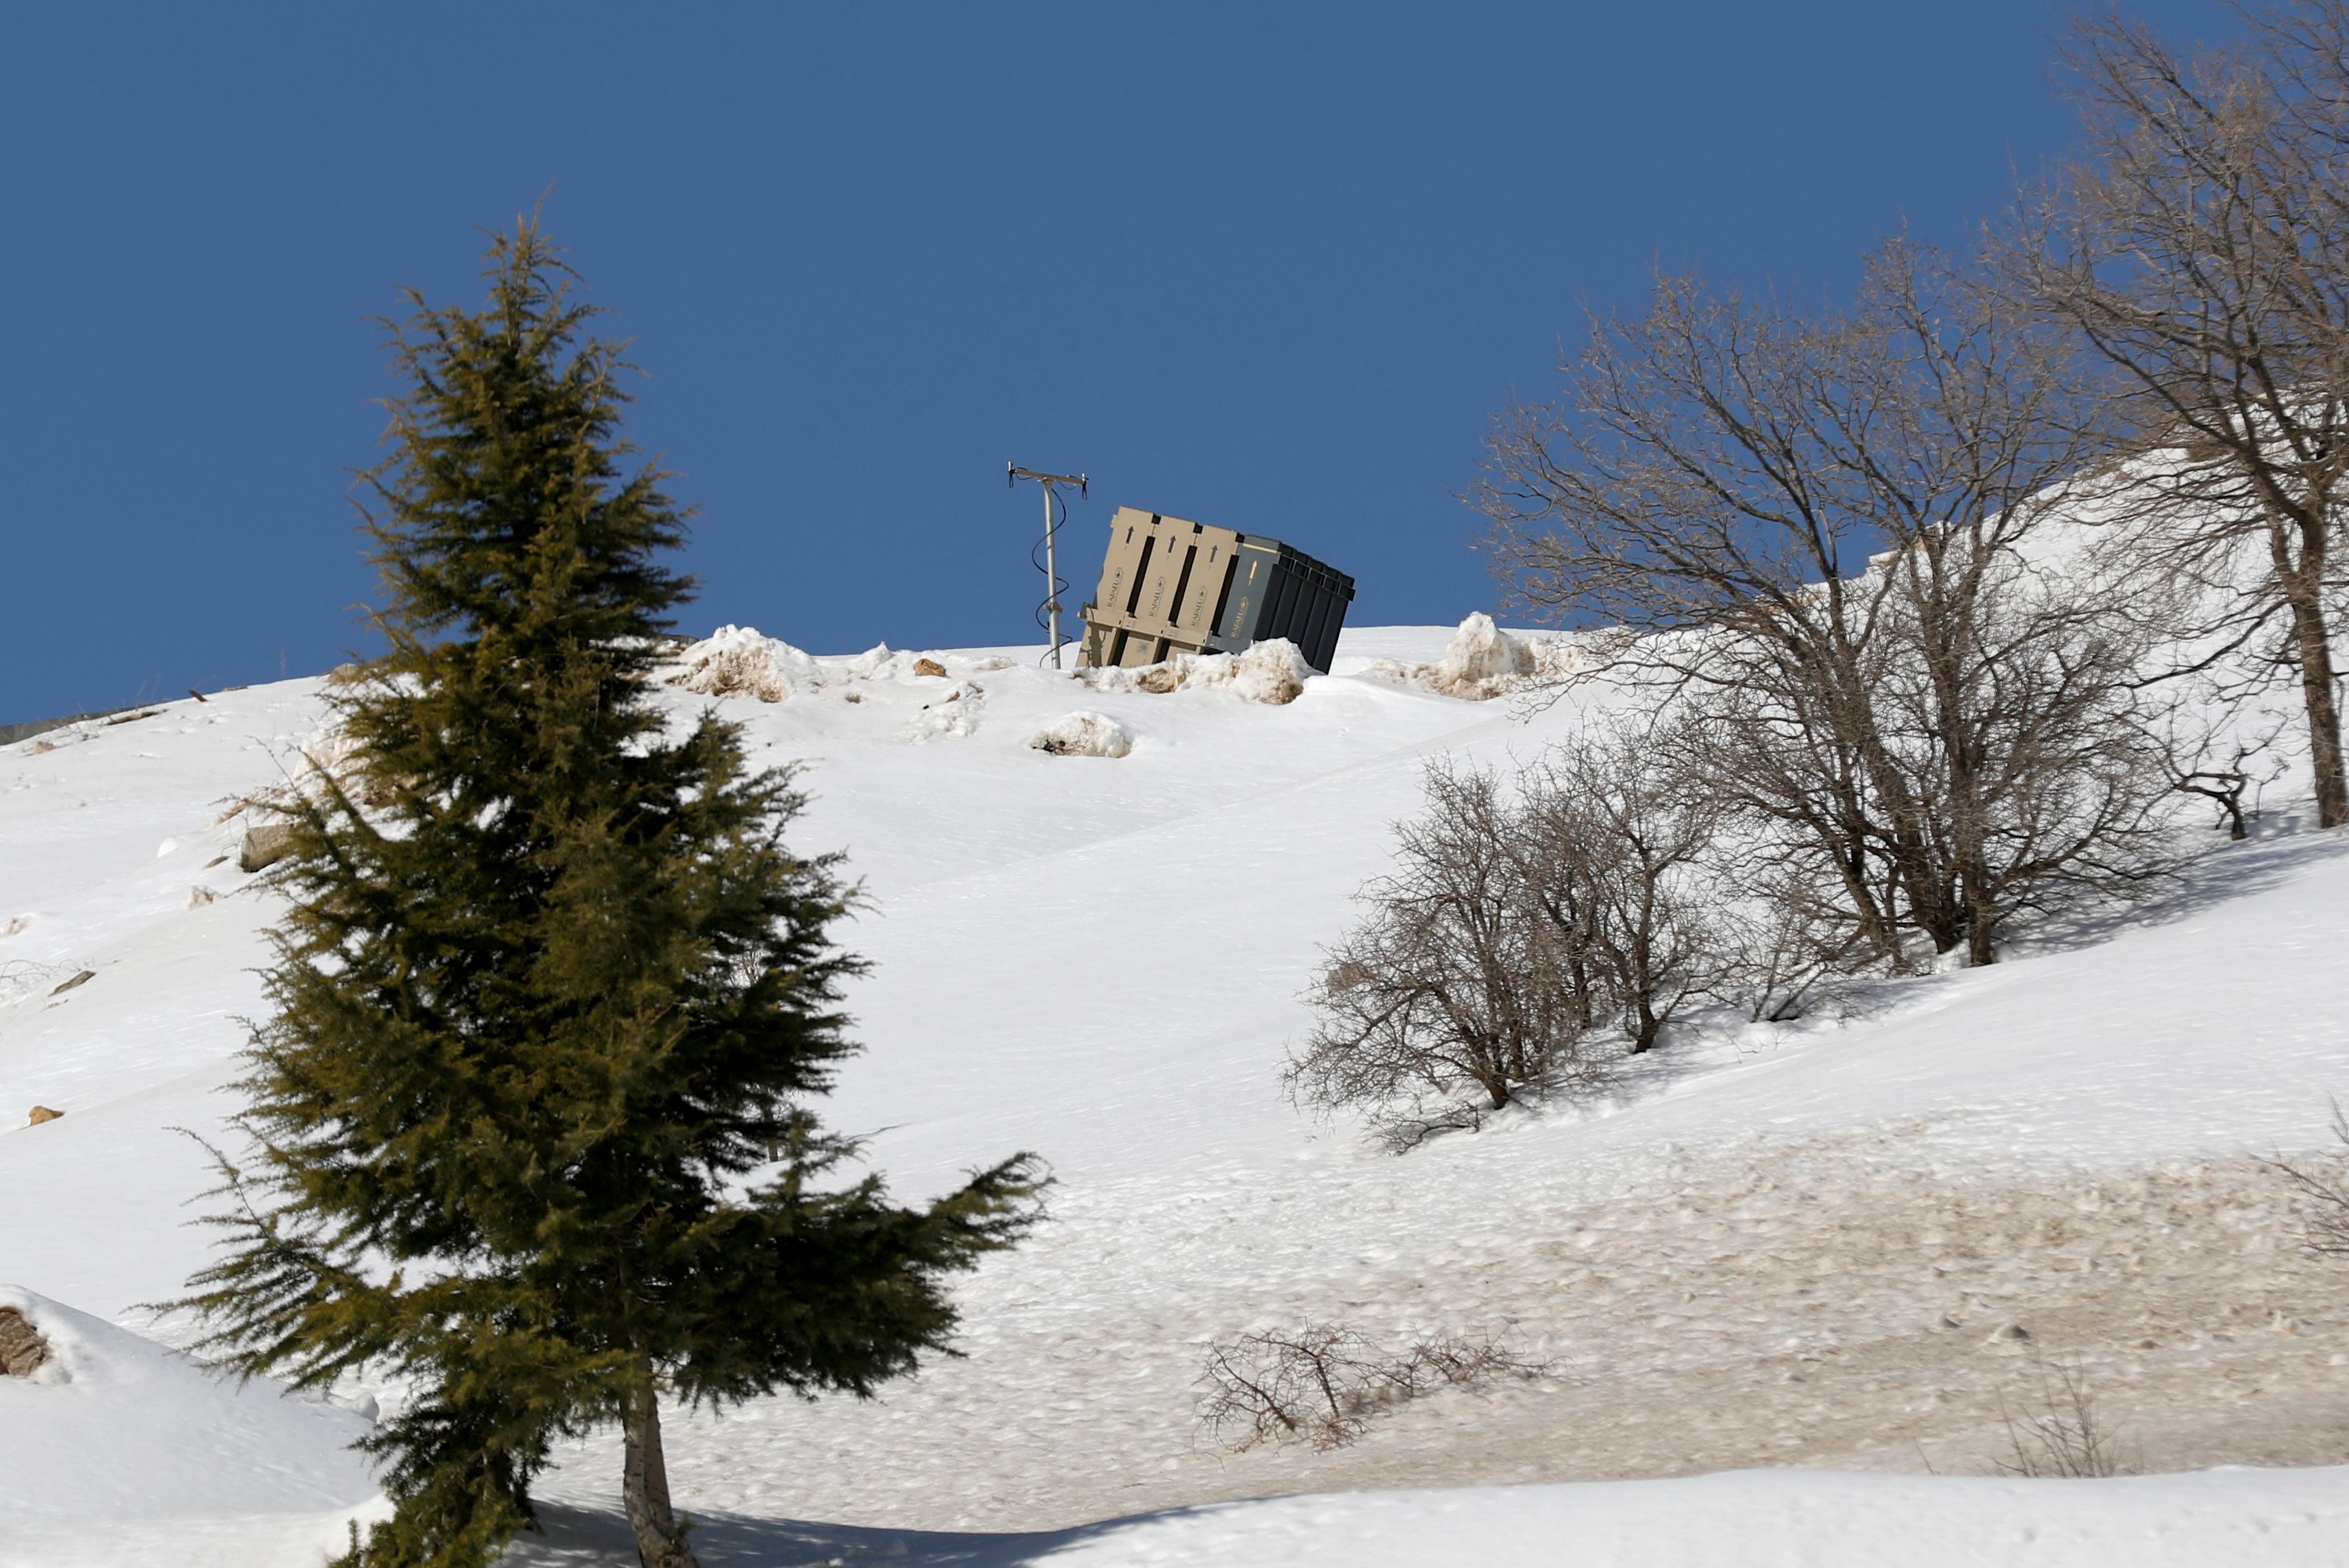 Israeli Iron Dome aerial defense systems deployed near the Mount Hermon resort, located at the intersection of the Israeli-Lebanese-Syrian border in the north of the Golan Heights on Jan. 21, 2019. According to media reports, the Israeli Defense Forces (IDF) stated that it had targeted Iranian Revolutionary Guards targets active in Syrian territory in response to alleged rocket that was fired from Syria toward Mount Hermon Resort on Jan. 20. (Atef Safadi—EP/EFE/REX/Shutterstock)